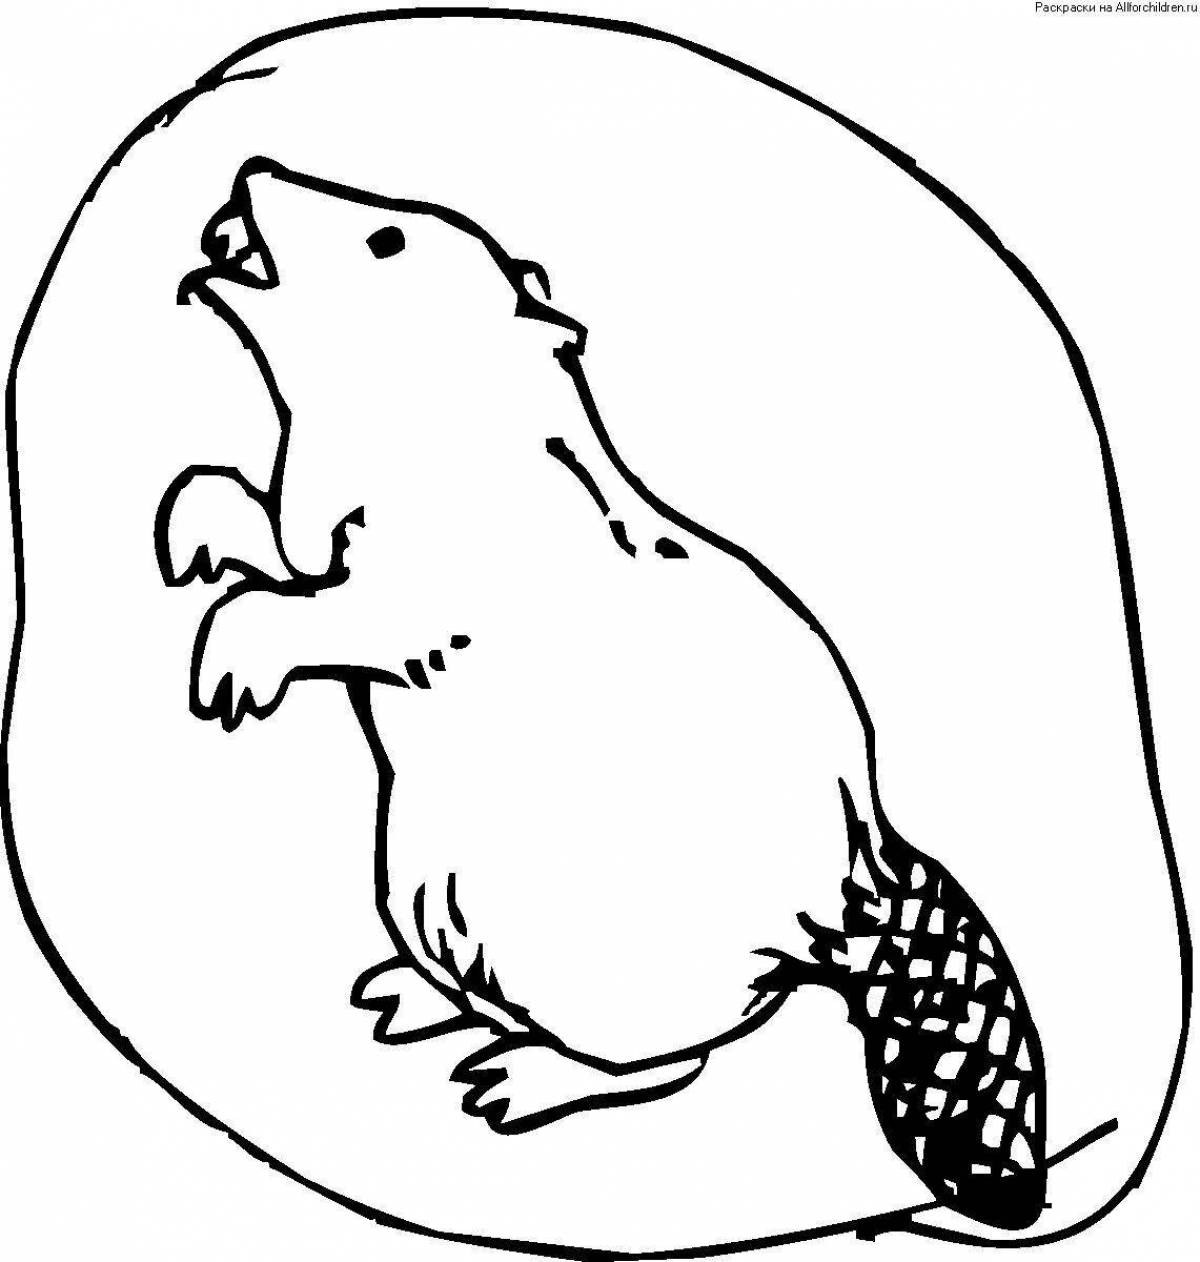 Children's beaver coloring pages